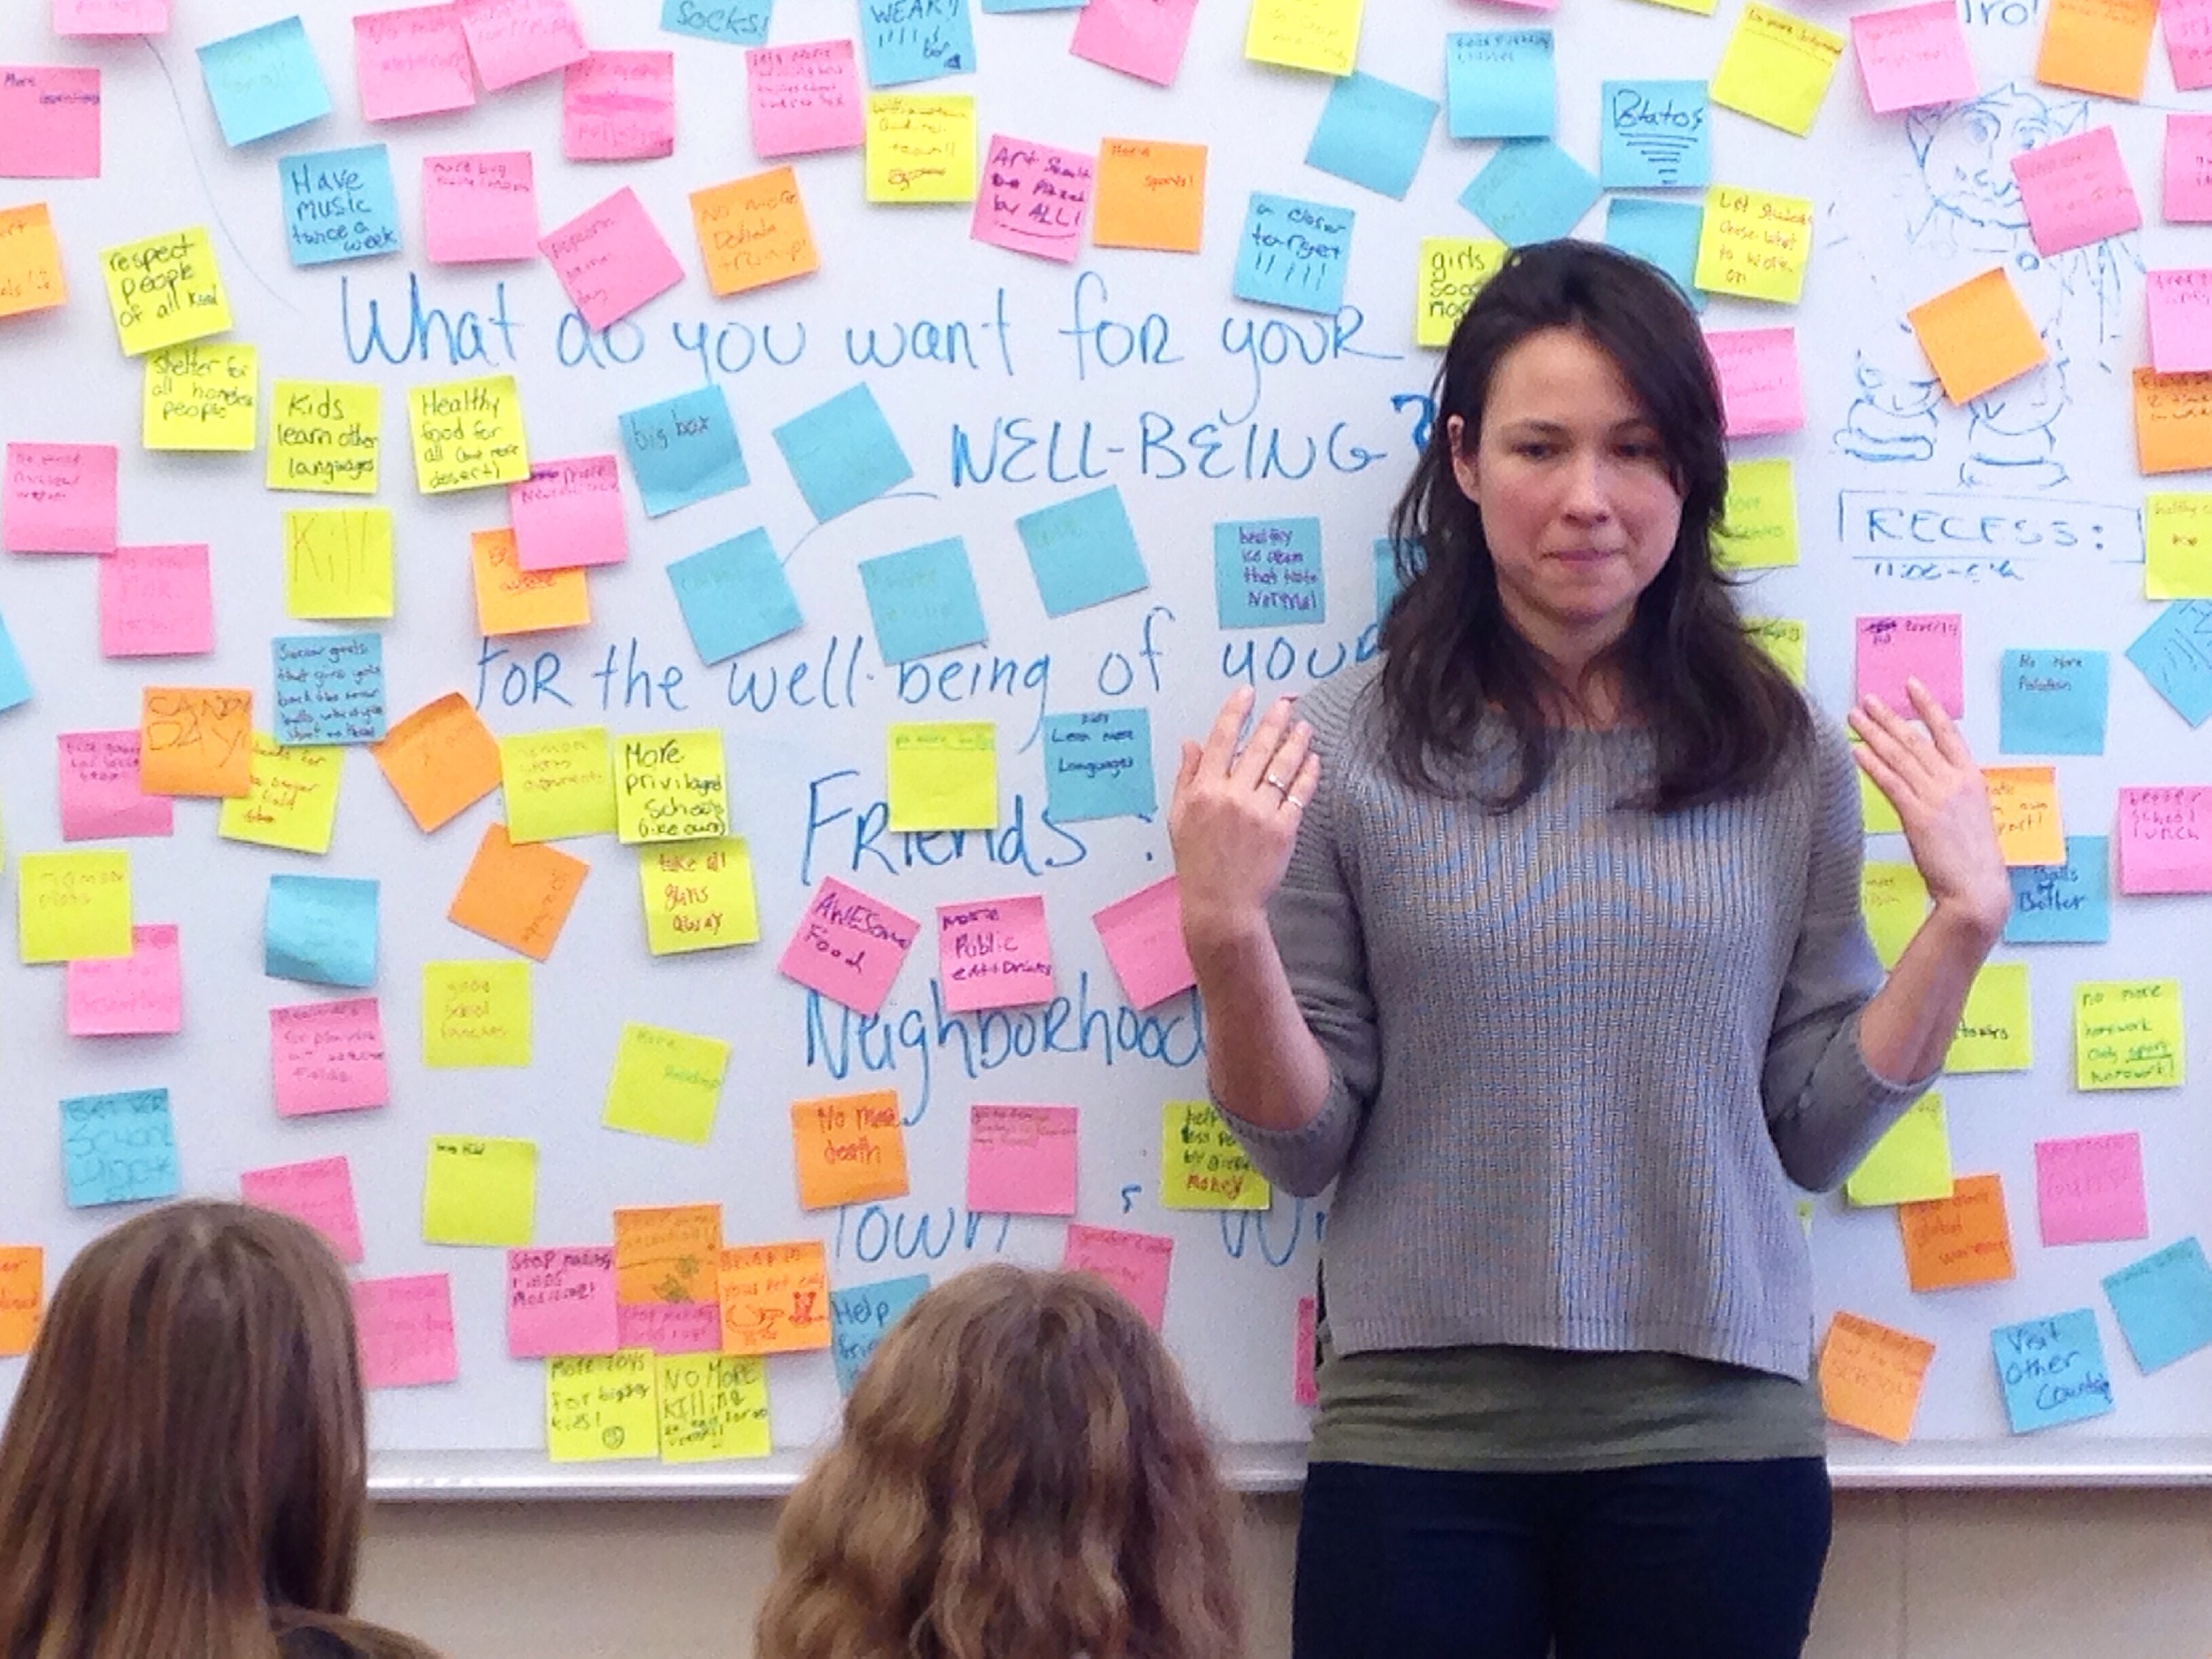  Emily Johnson facilitating a Community Visioning Session at Williamstown Elementary School. Photo by Maggie Thompson 